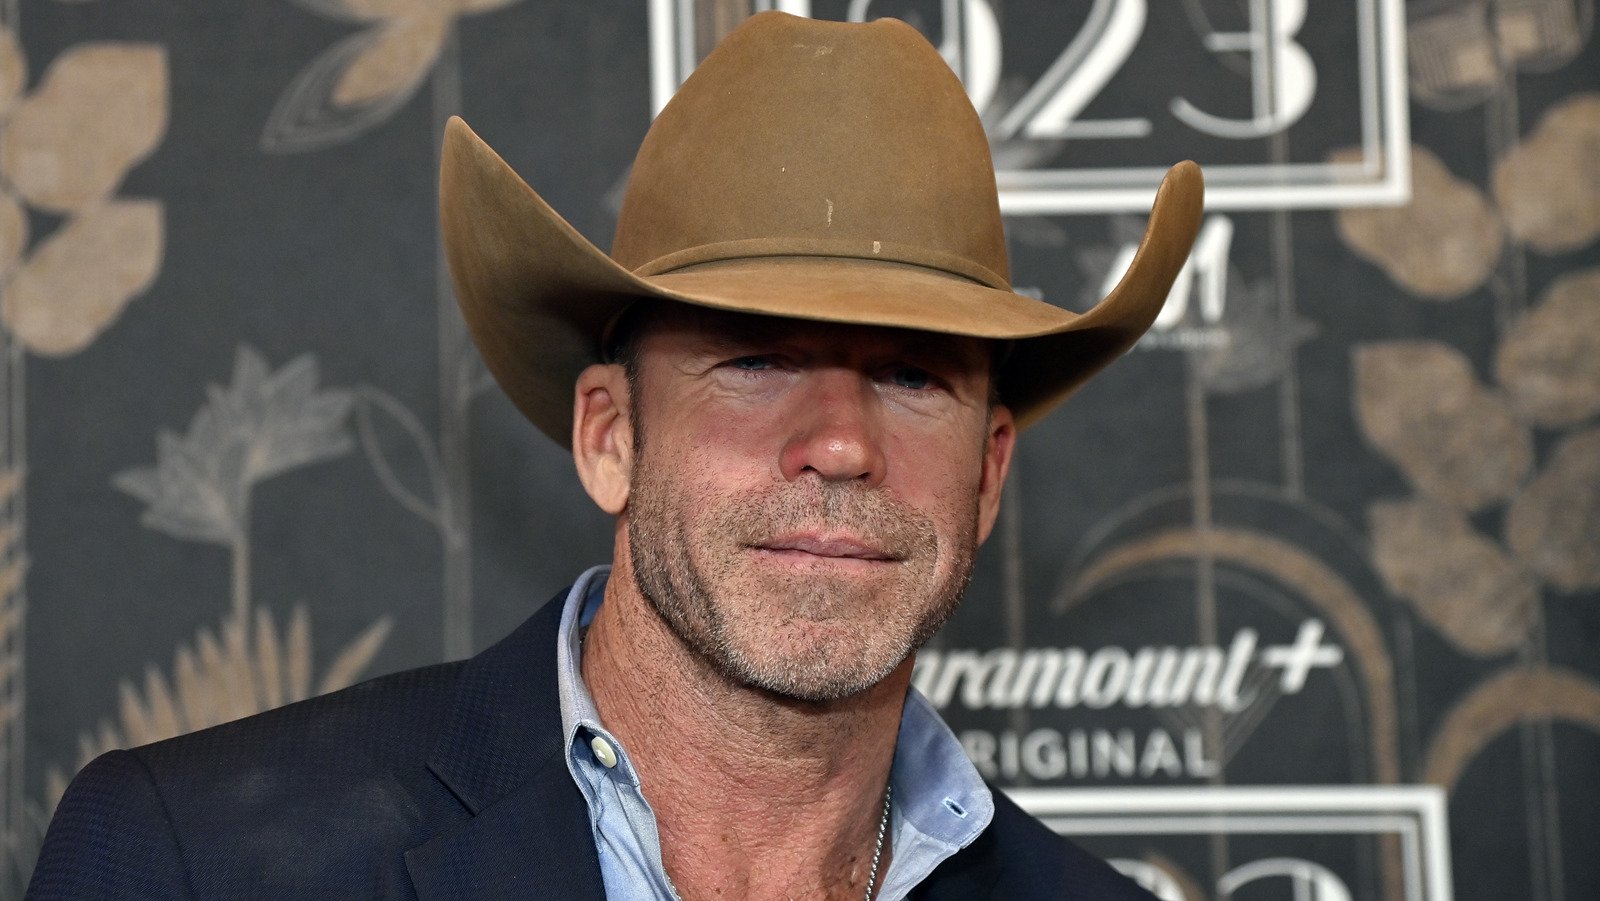 Yellowstone: Paramount Pays Taylor Sheridan A Pretty Penny To Film On His Ranch